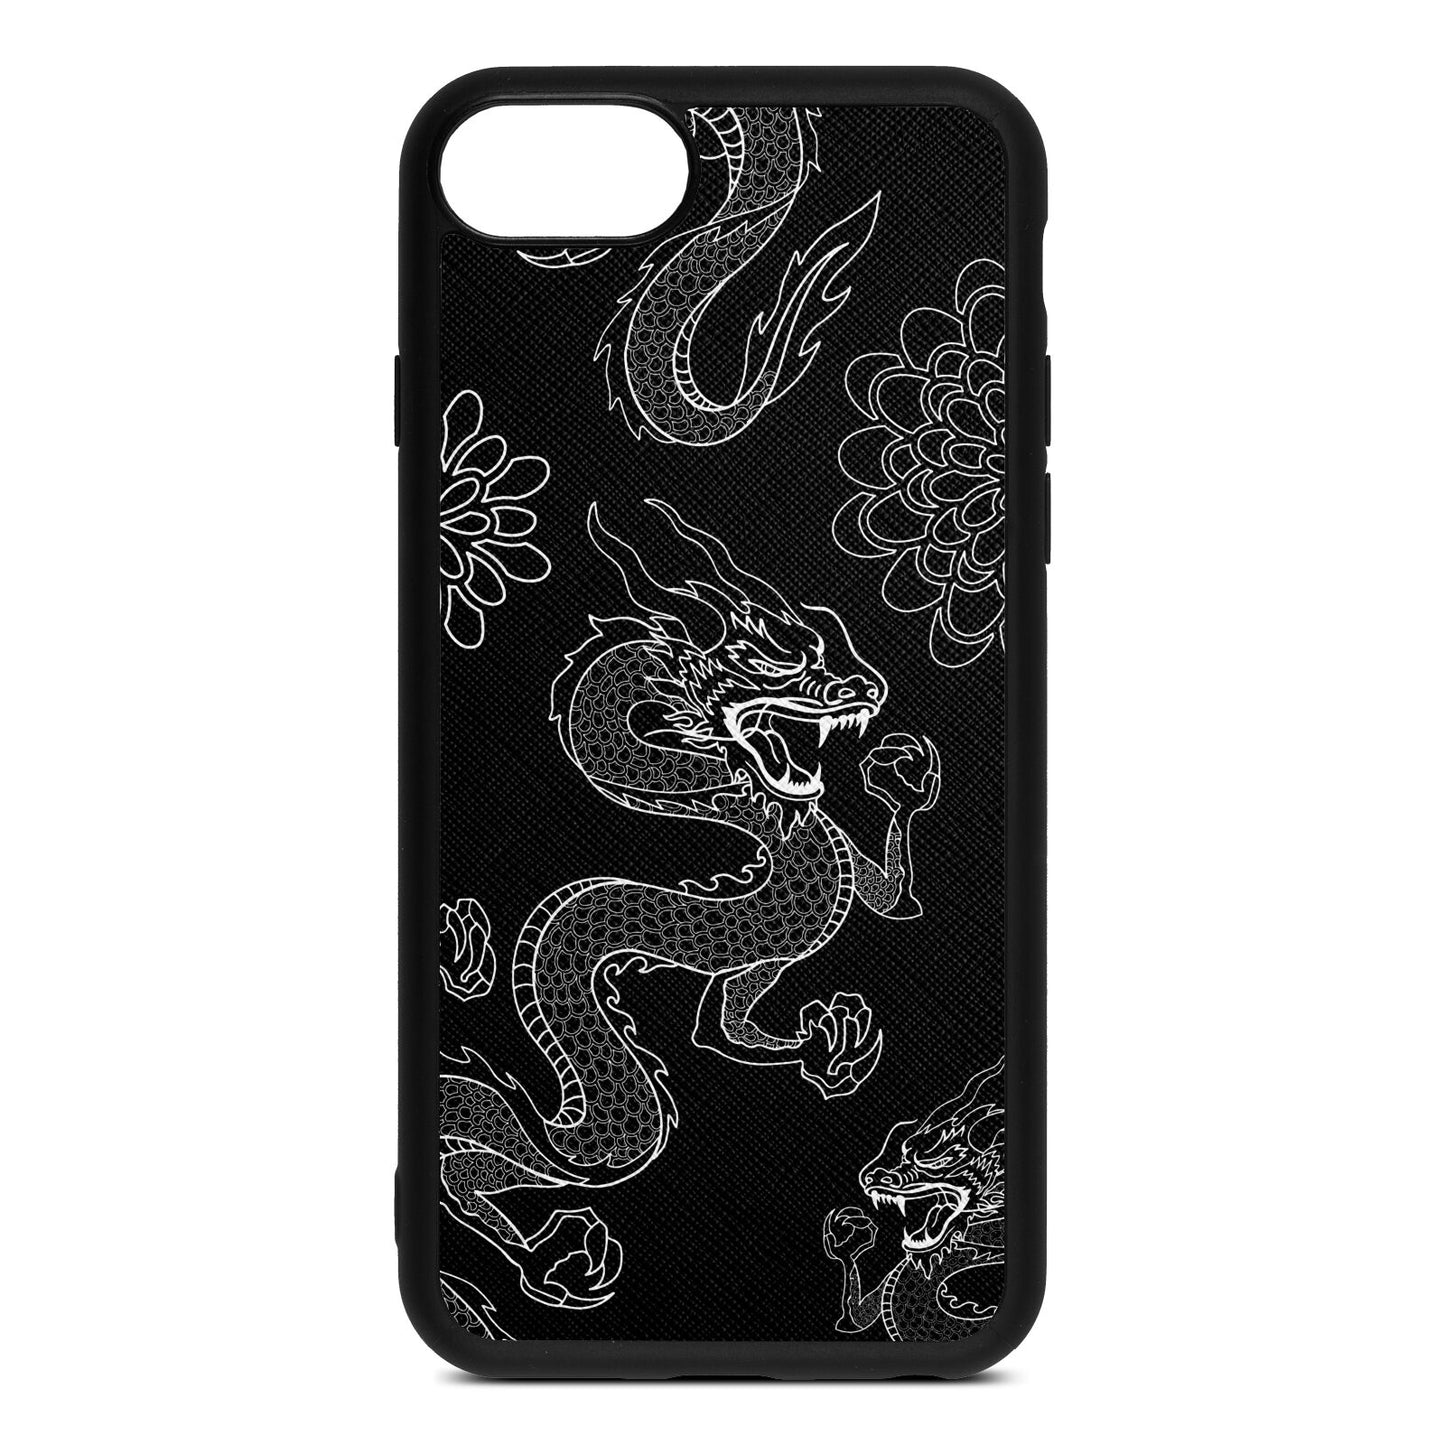 Dragons Black Saffiano Leather iPhone 8 Case